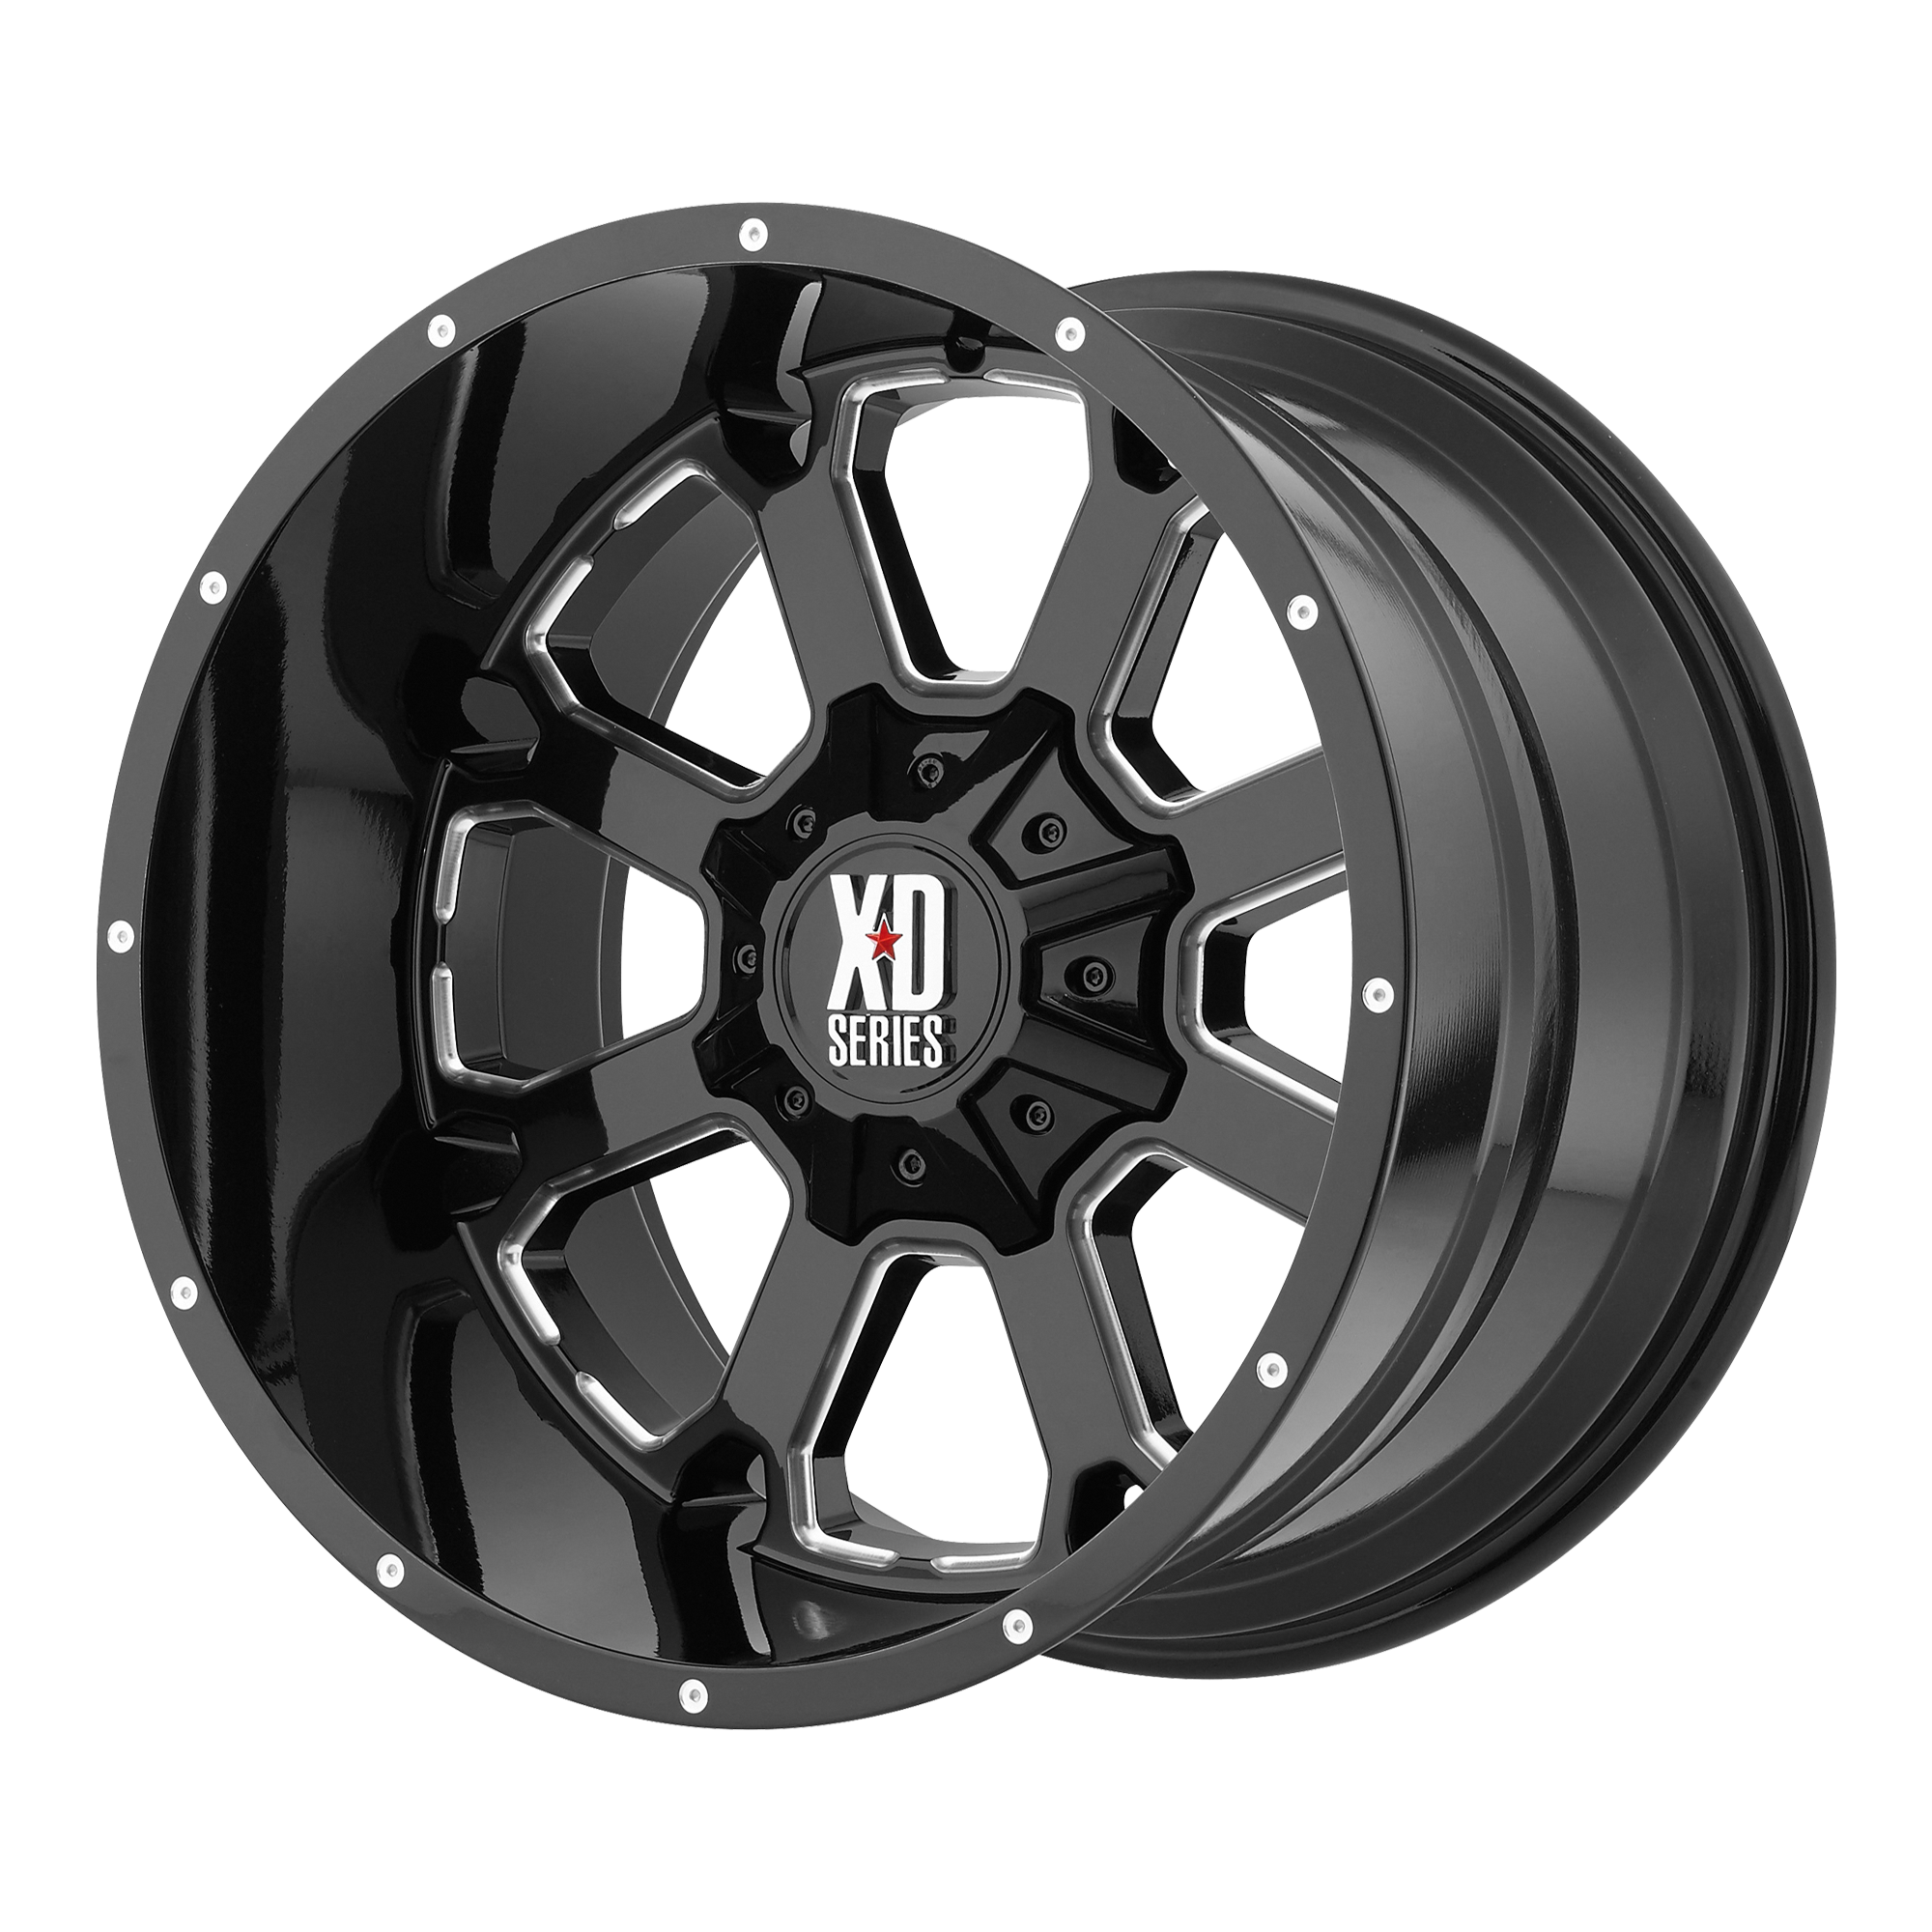 BUCK 25 20x10 8x180.00 GLOSS BLACK MILLED (-24 mm) - Tires and Engine Performance